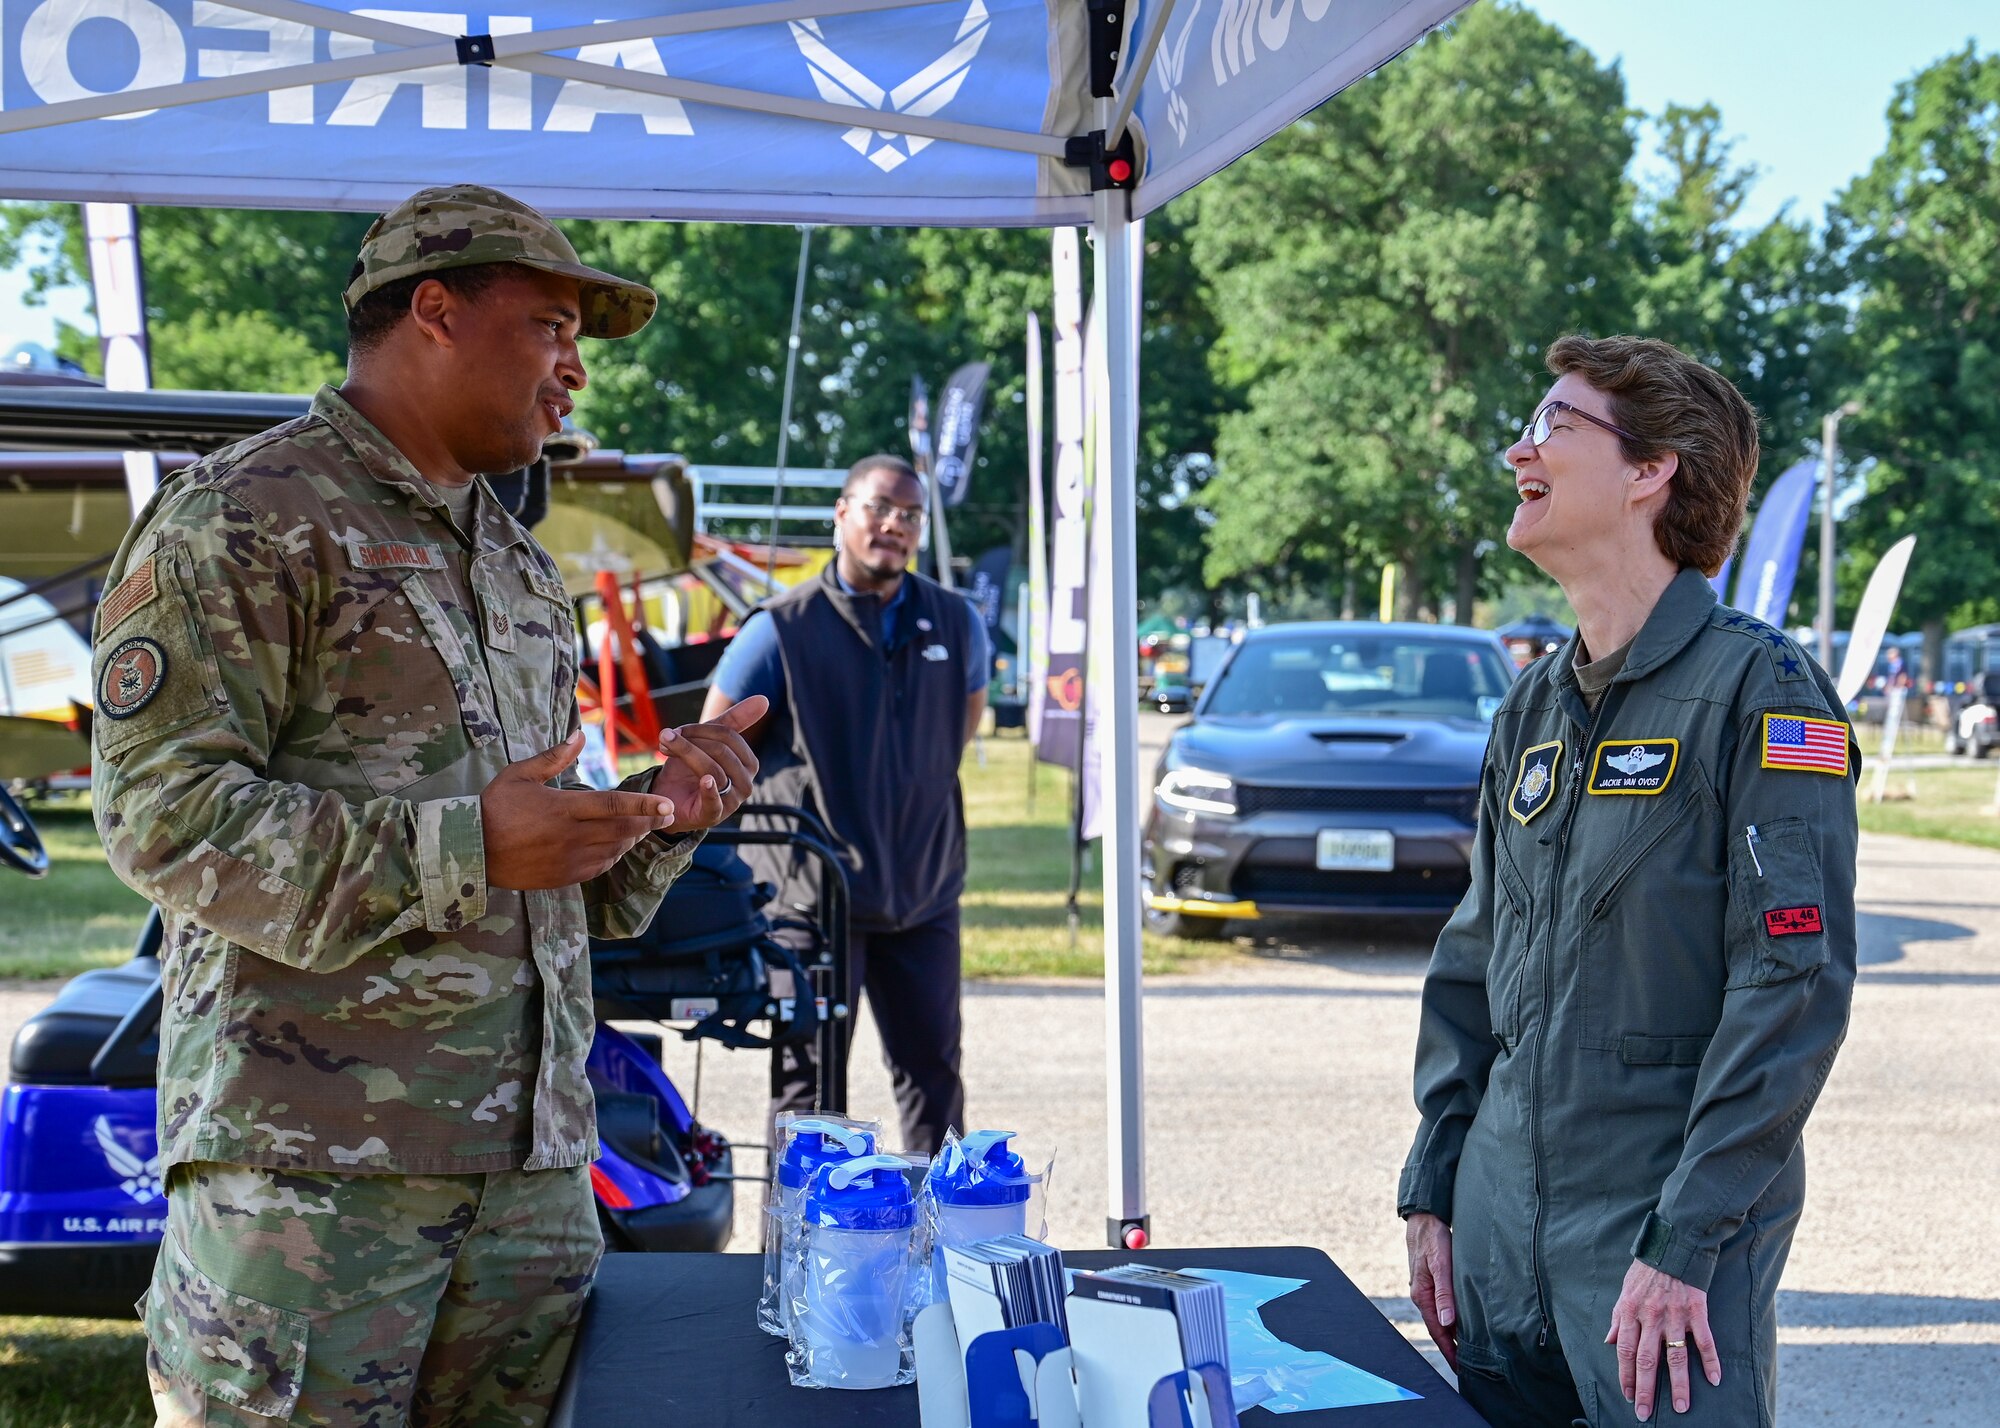 Gen. Jacqueline D. Van Ovost, commander of U.S. Transportation Command, speaks with Tech. Sgt. Demarcus Shanklin, Air Force Recruiting Service events marketer, during EAA AirVenture Oshkosh, in Oshkosh, WI, July 27, 2023.